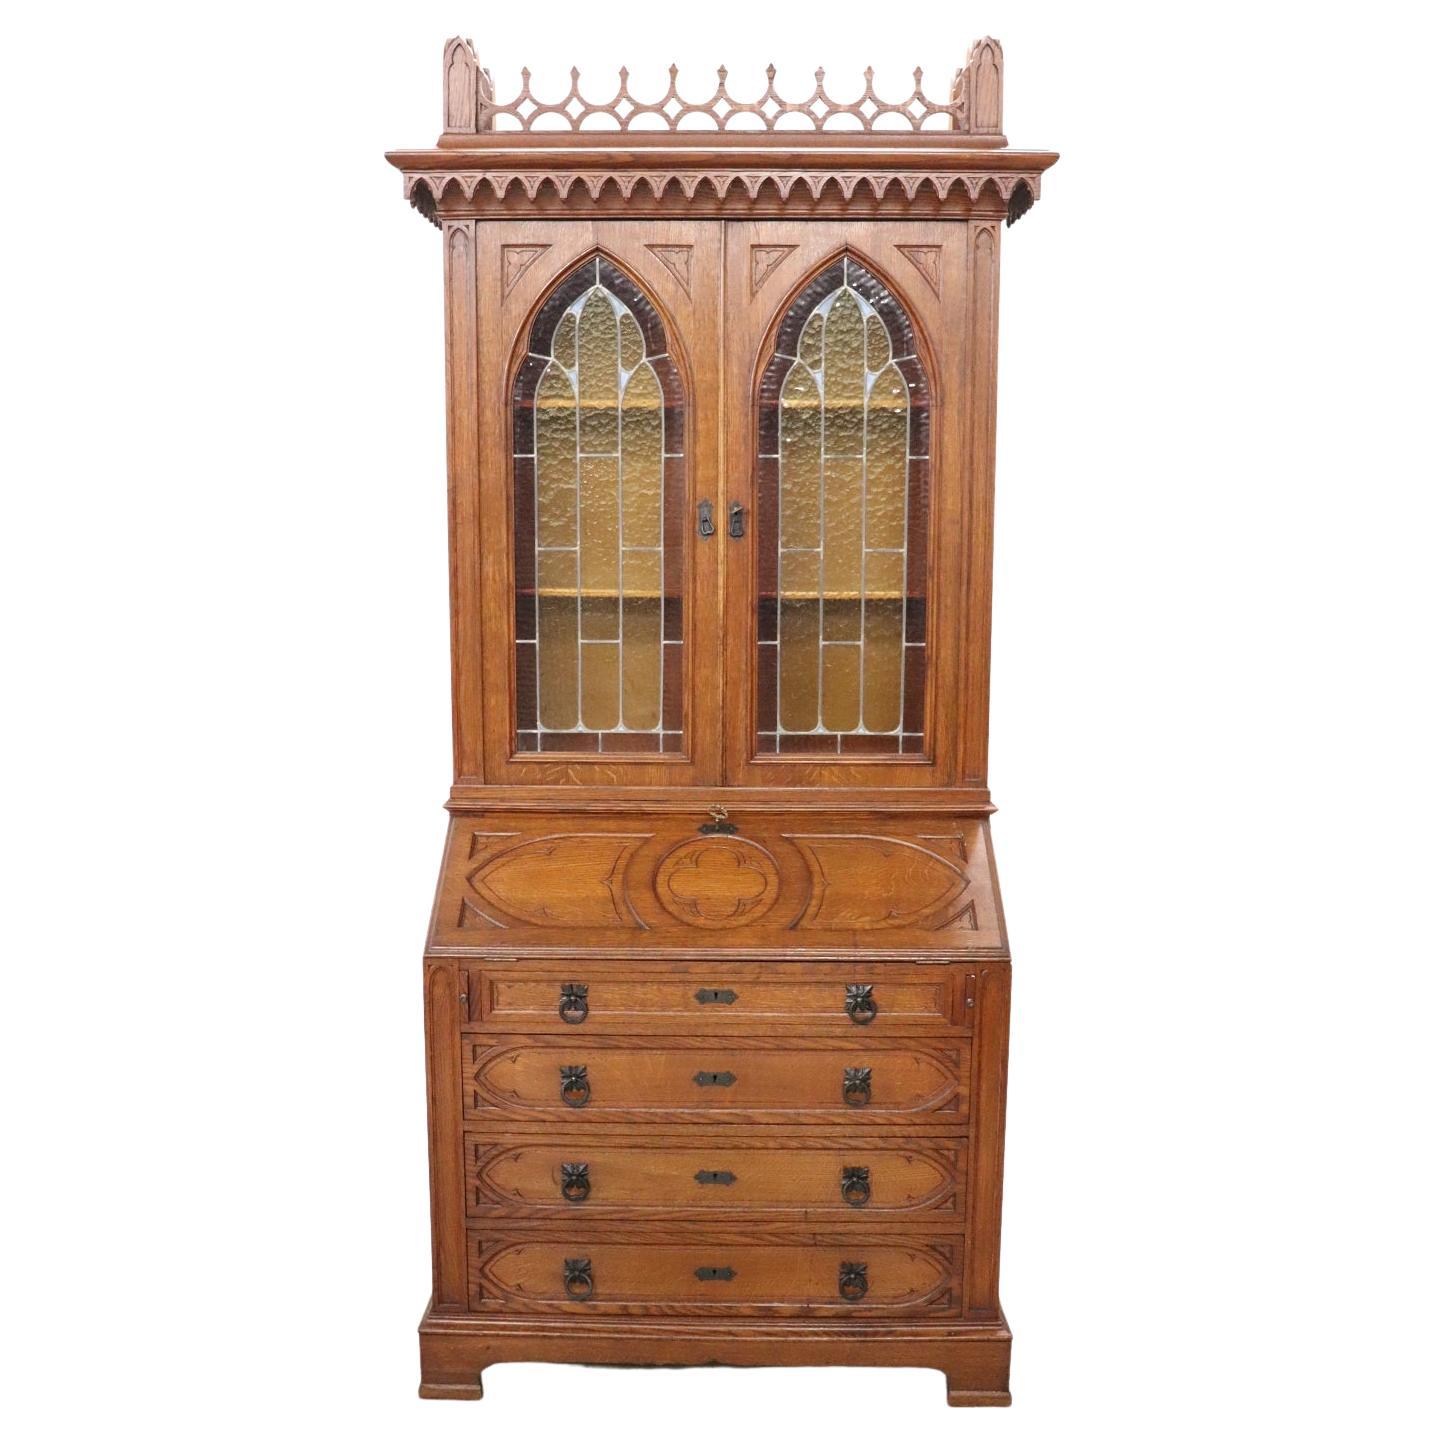 Early 20th Century Italian Gothic Style Solid Oak Wood Cabinet